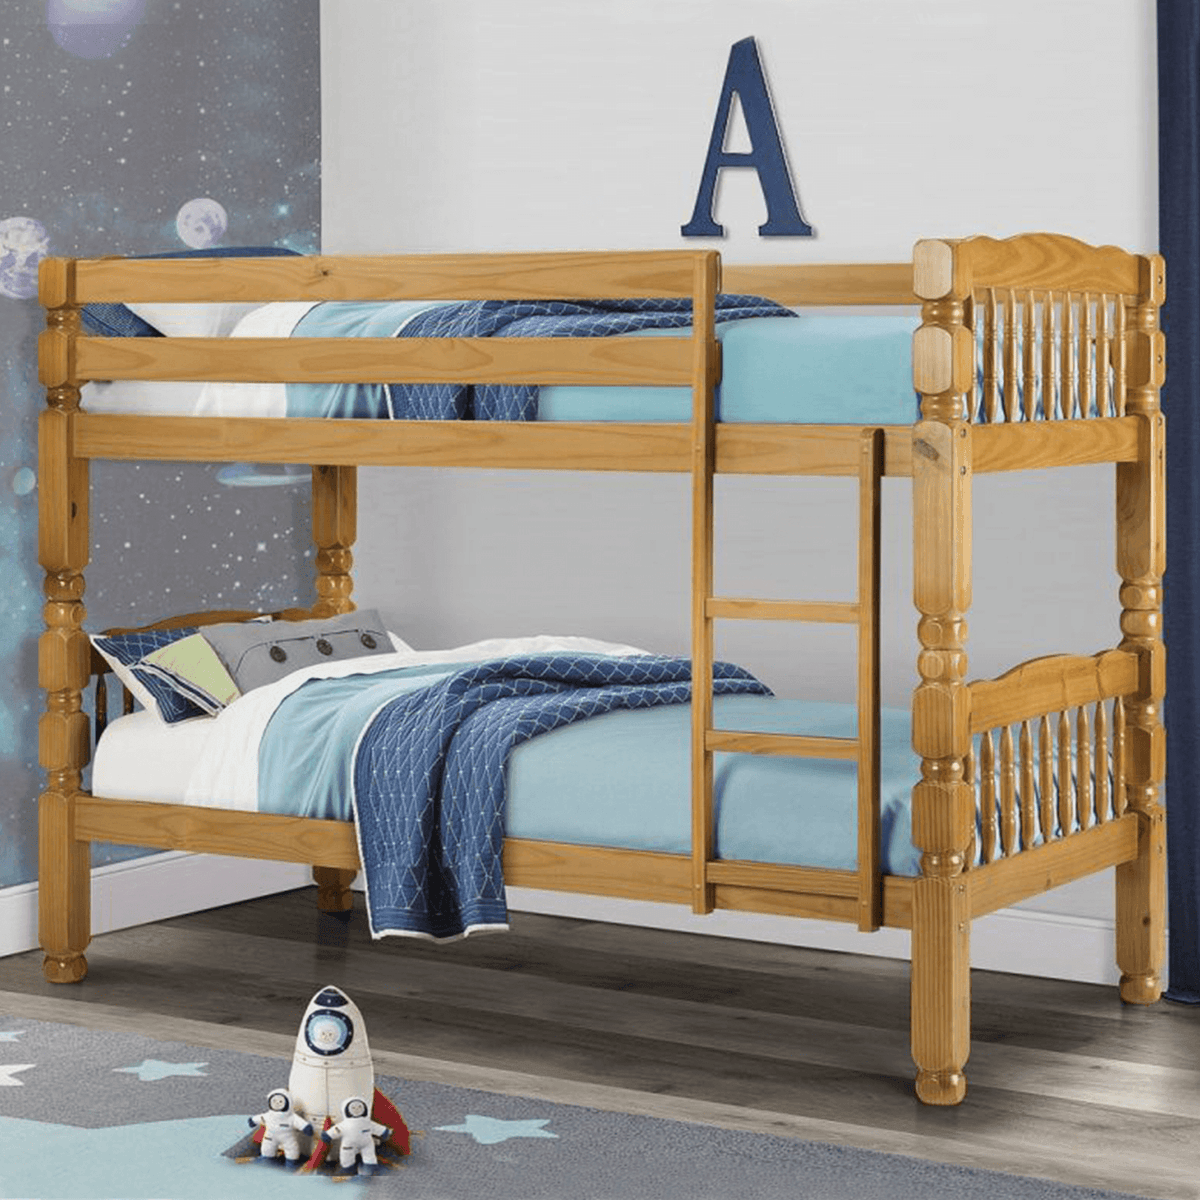 yellow pine wood bunk bed